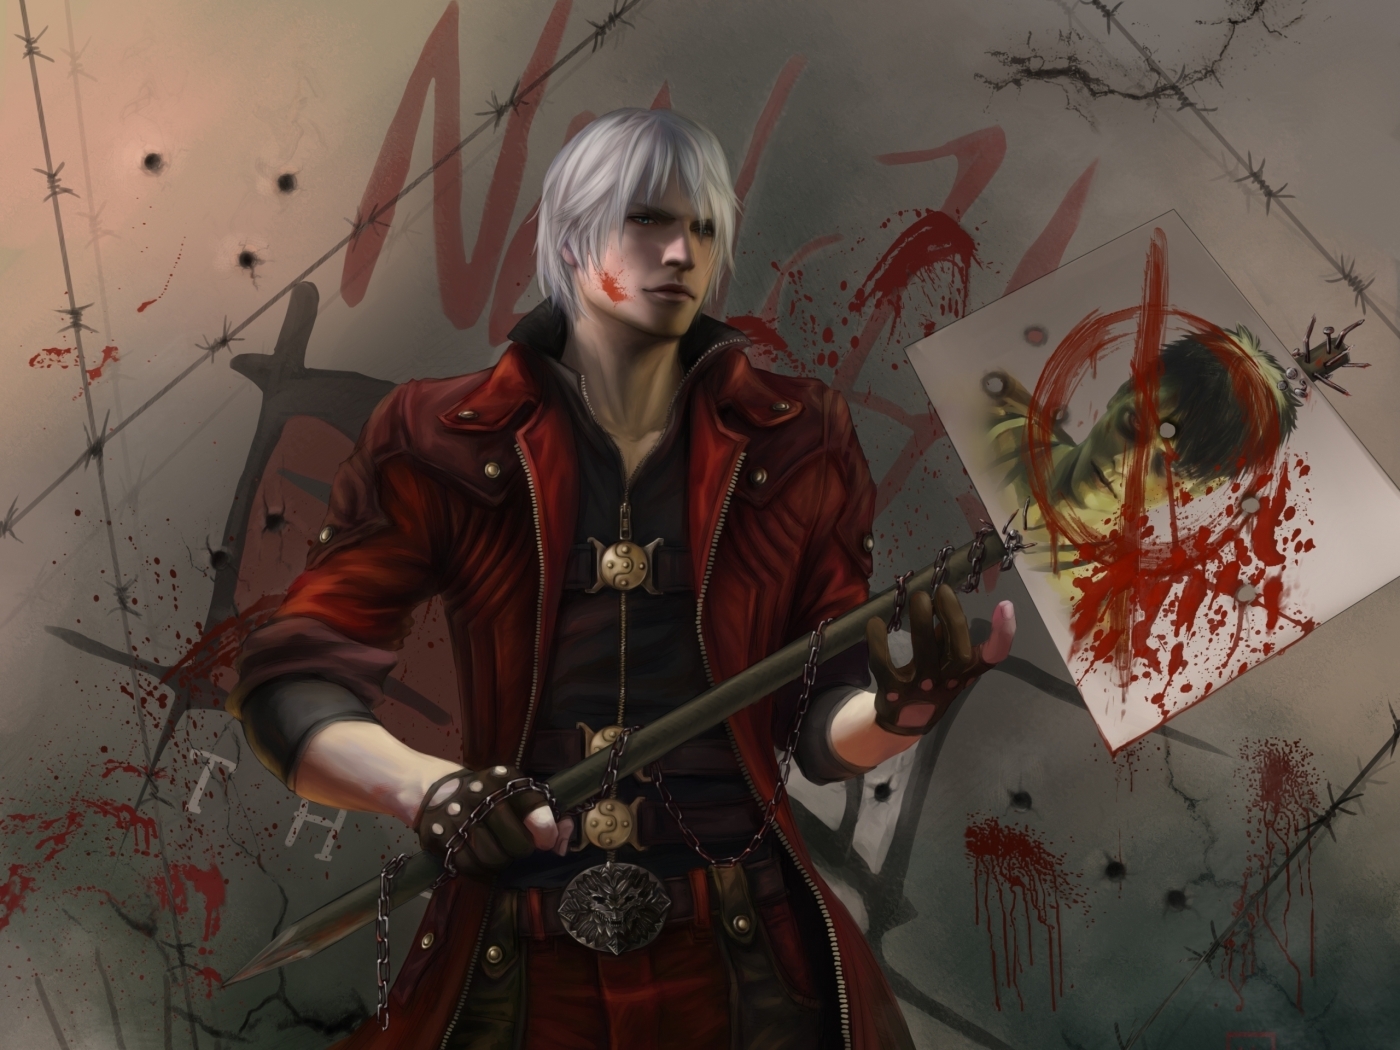 24976 download wallpaper games, devil may cry screensavers and pictures for free